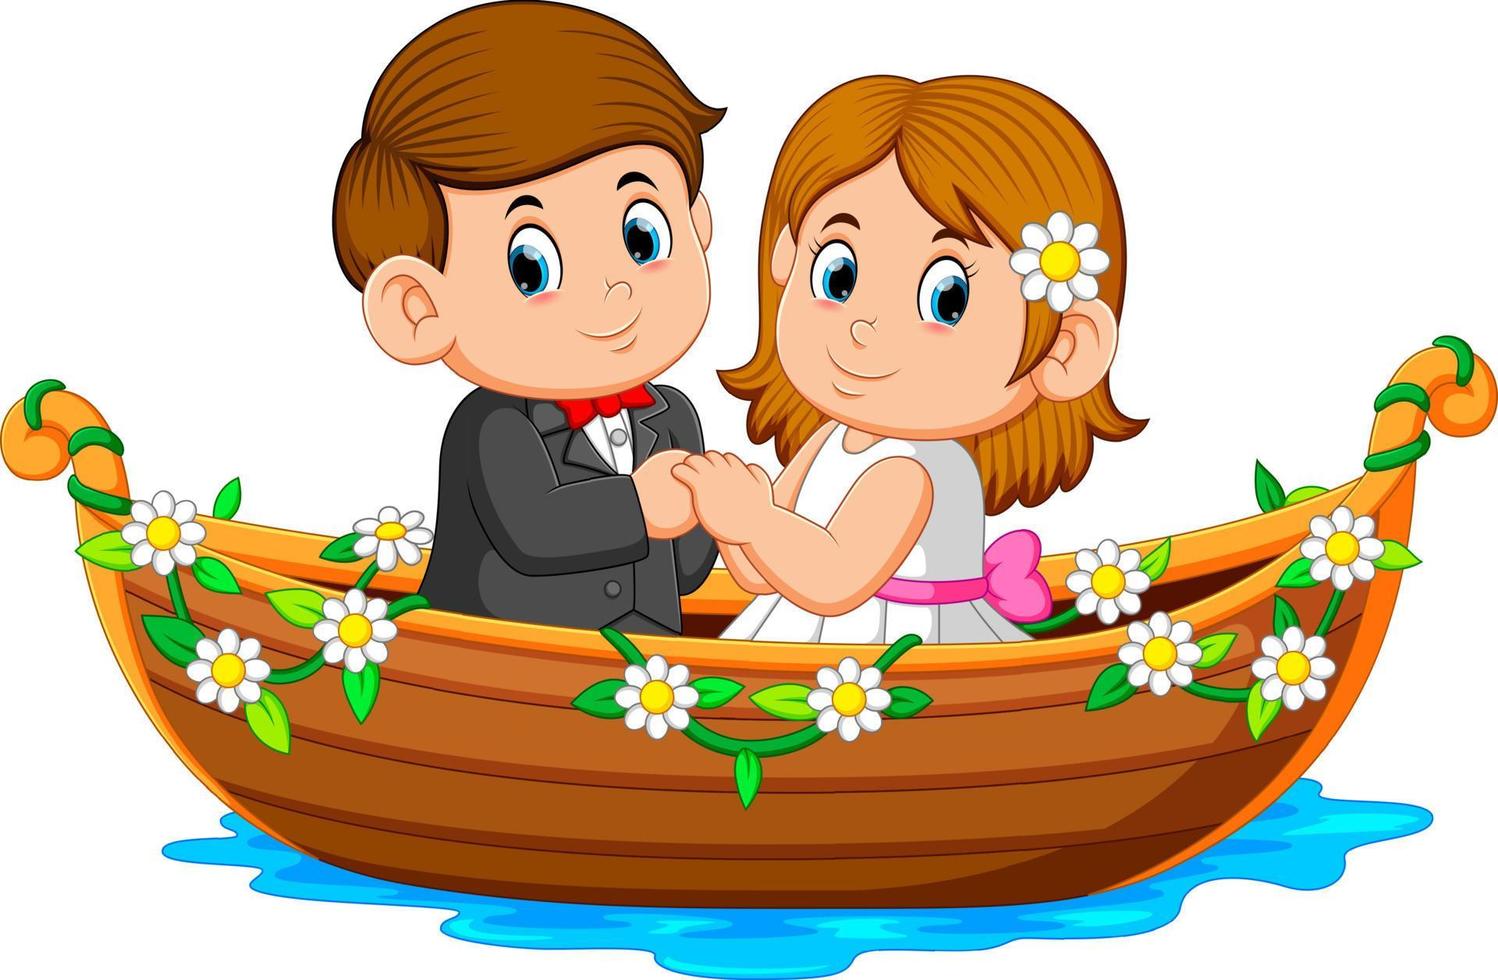 the couple are posing on the beautiful boat with the flowers around it vector